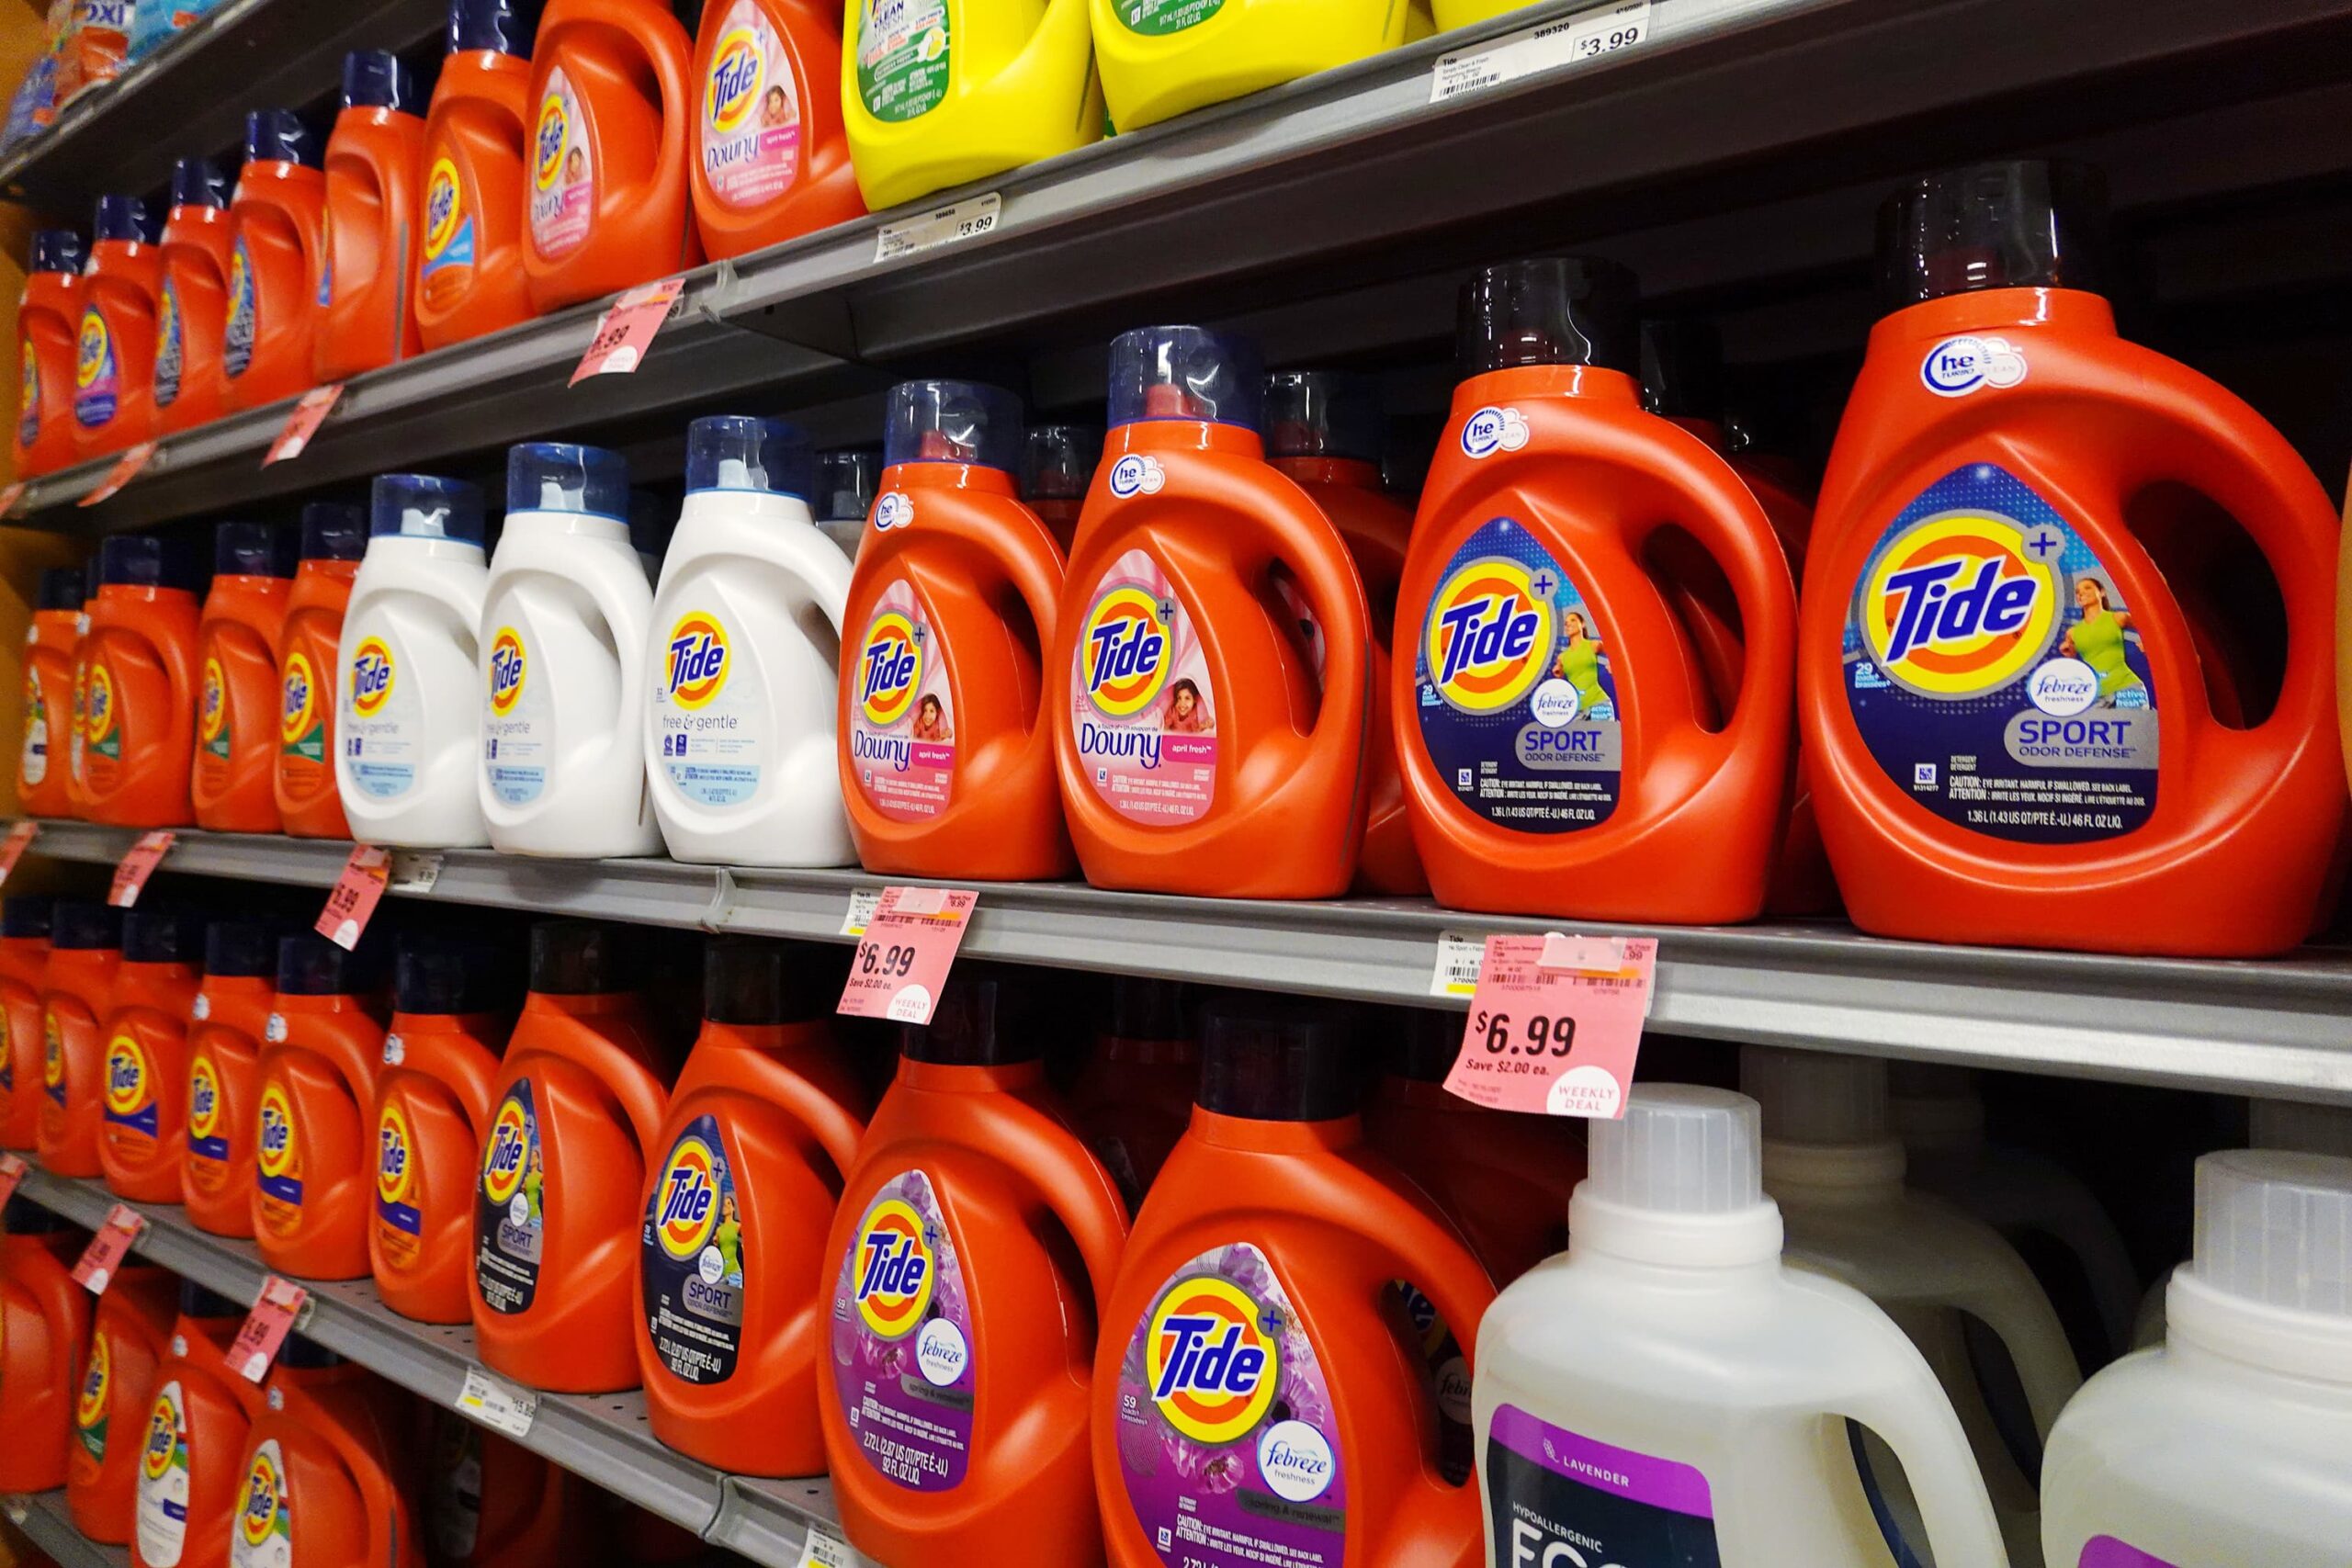 Procter & Gamble plans more price hikes for Tide and other products